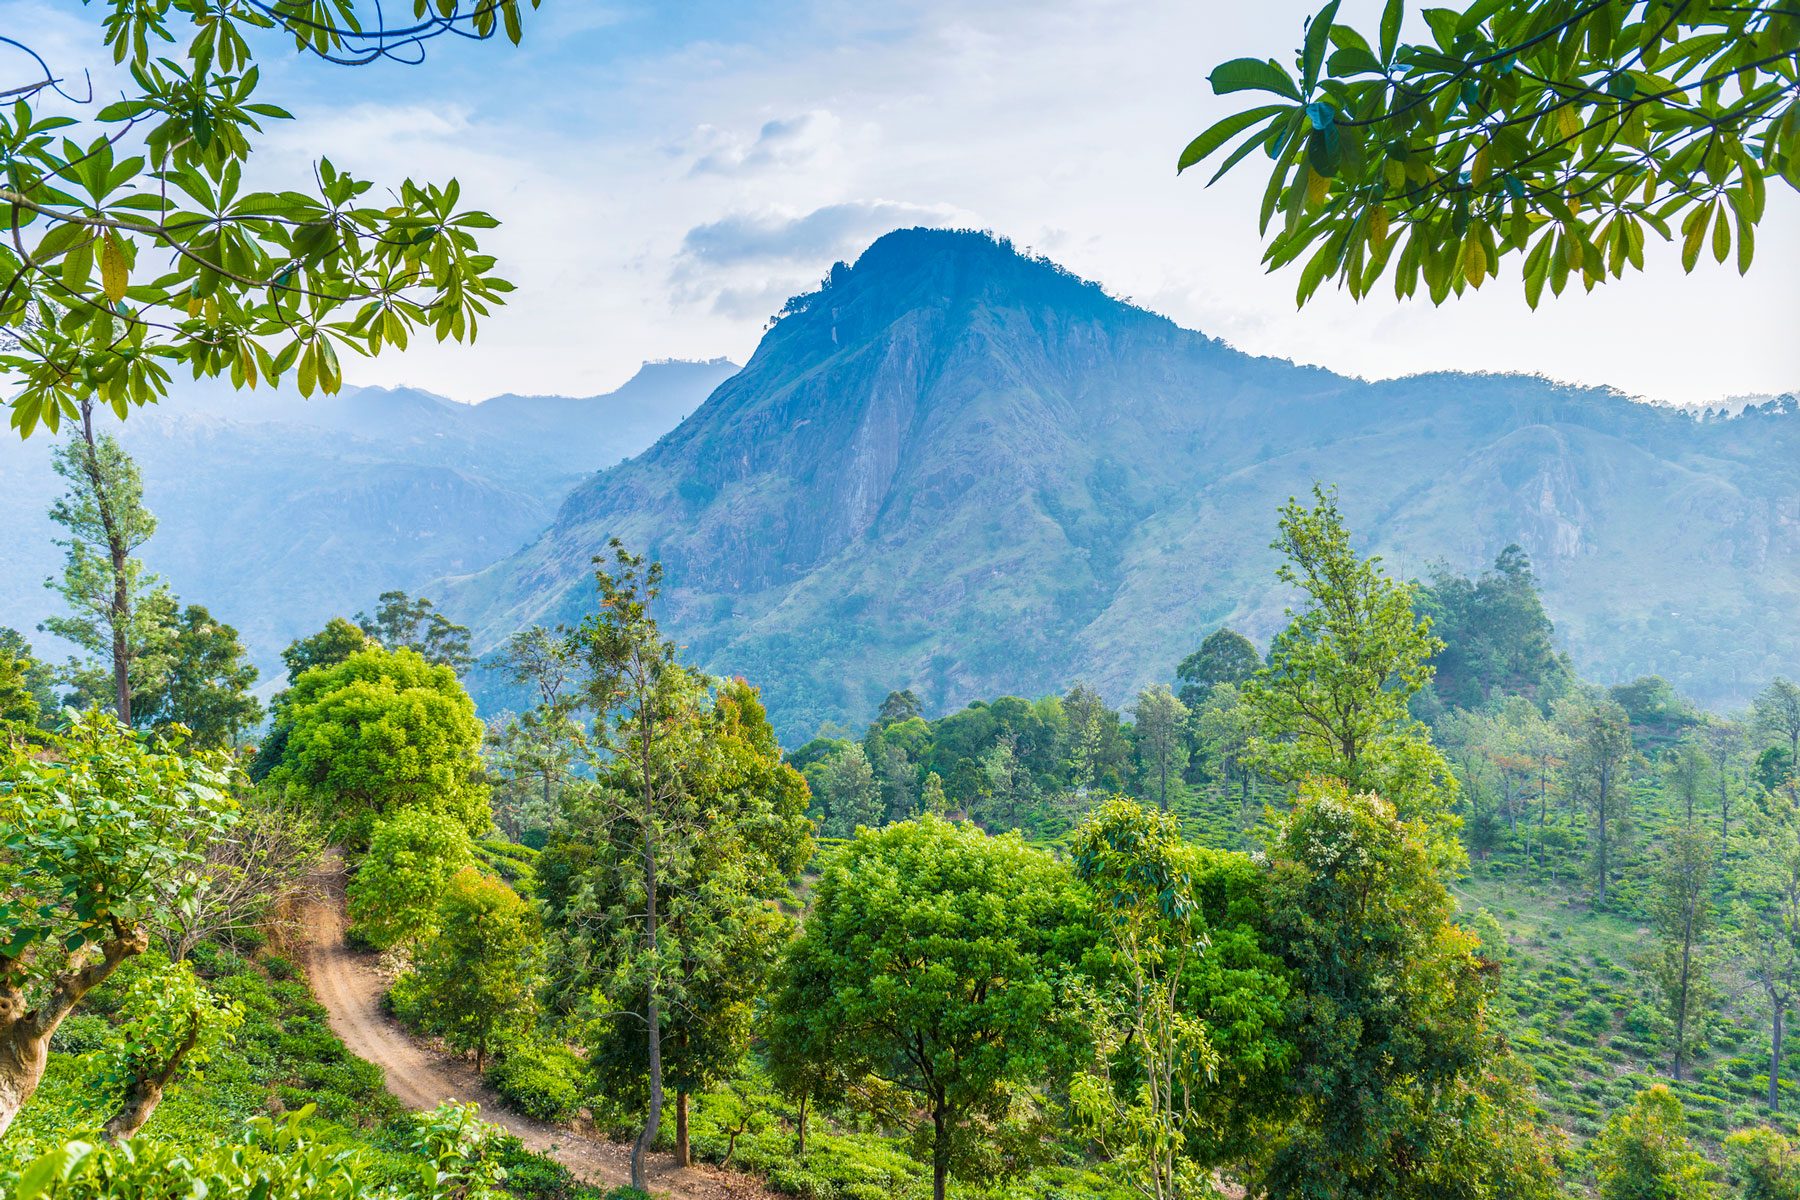 <p class=""><strong>Why you should go:</strong> To check out amazing new hiking trails and old cultures</p> <p>The newly opened Pekoe Trail in Sri Lanka is a fantastic way to explore the country's varied landscapes. Ten years in the making, the Pekoe Trail is the first collection of destination-based walking trails that aims to support remote communities, promote cultural heritage and showcase Sri Lankan scenery. Most of the trails opened in the fall of 2023, with a few more opening at the beginning of 2024.</p> <p>The 186-mile route starts in the central city of Kandy, famous for the Temple of the Tooth, and meanders through to stunning mountain views of Ella. Audley Travel, says Heverling, can arrange treks to the most scenic parts of the Sri Lanka trail. Hikers will walk on the region's famed tea trails, as well as through forests, jungle and remote towns and villages.</p> <p><strong>Where to stay: </strong>The experts at Audley recommend <a href="https://www.tripadvisor.com/Hotel_Review-g616035-d1222213-Reviews-The_Mountain_Heavens-Ella_Uva_Province.html" rel="noopener noreferrer">Mountain Heavens</a> for its fantastic infinity pool that will make you feel like you're literally floating over the valley. Big, comfy beds and modern amenities, not to mention a delicious included breakfast, all add up to a very luxurious end to a hike.</p> <p class="listicle-page__cta-button-shop"><a class="shop-btn" href="https://www.tripadvisor.com/Hotel_Review-g616035-d1222213-Reviews-The_Mountain_Heavens-Ella_Uva_Province.html">Book Now</a></p>